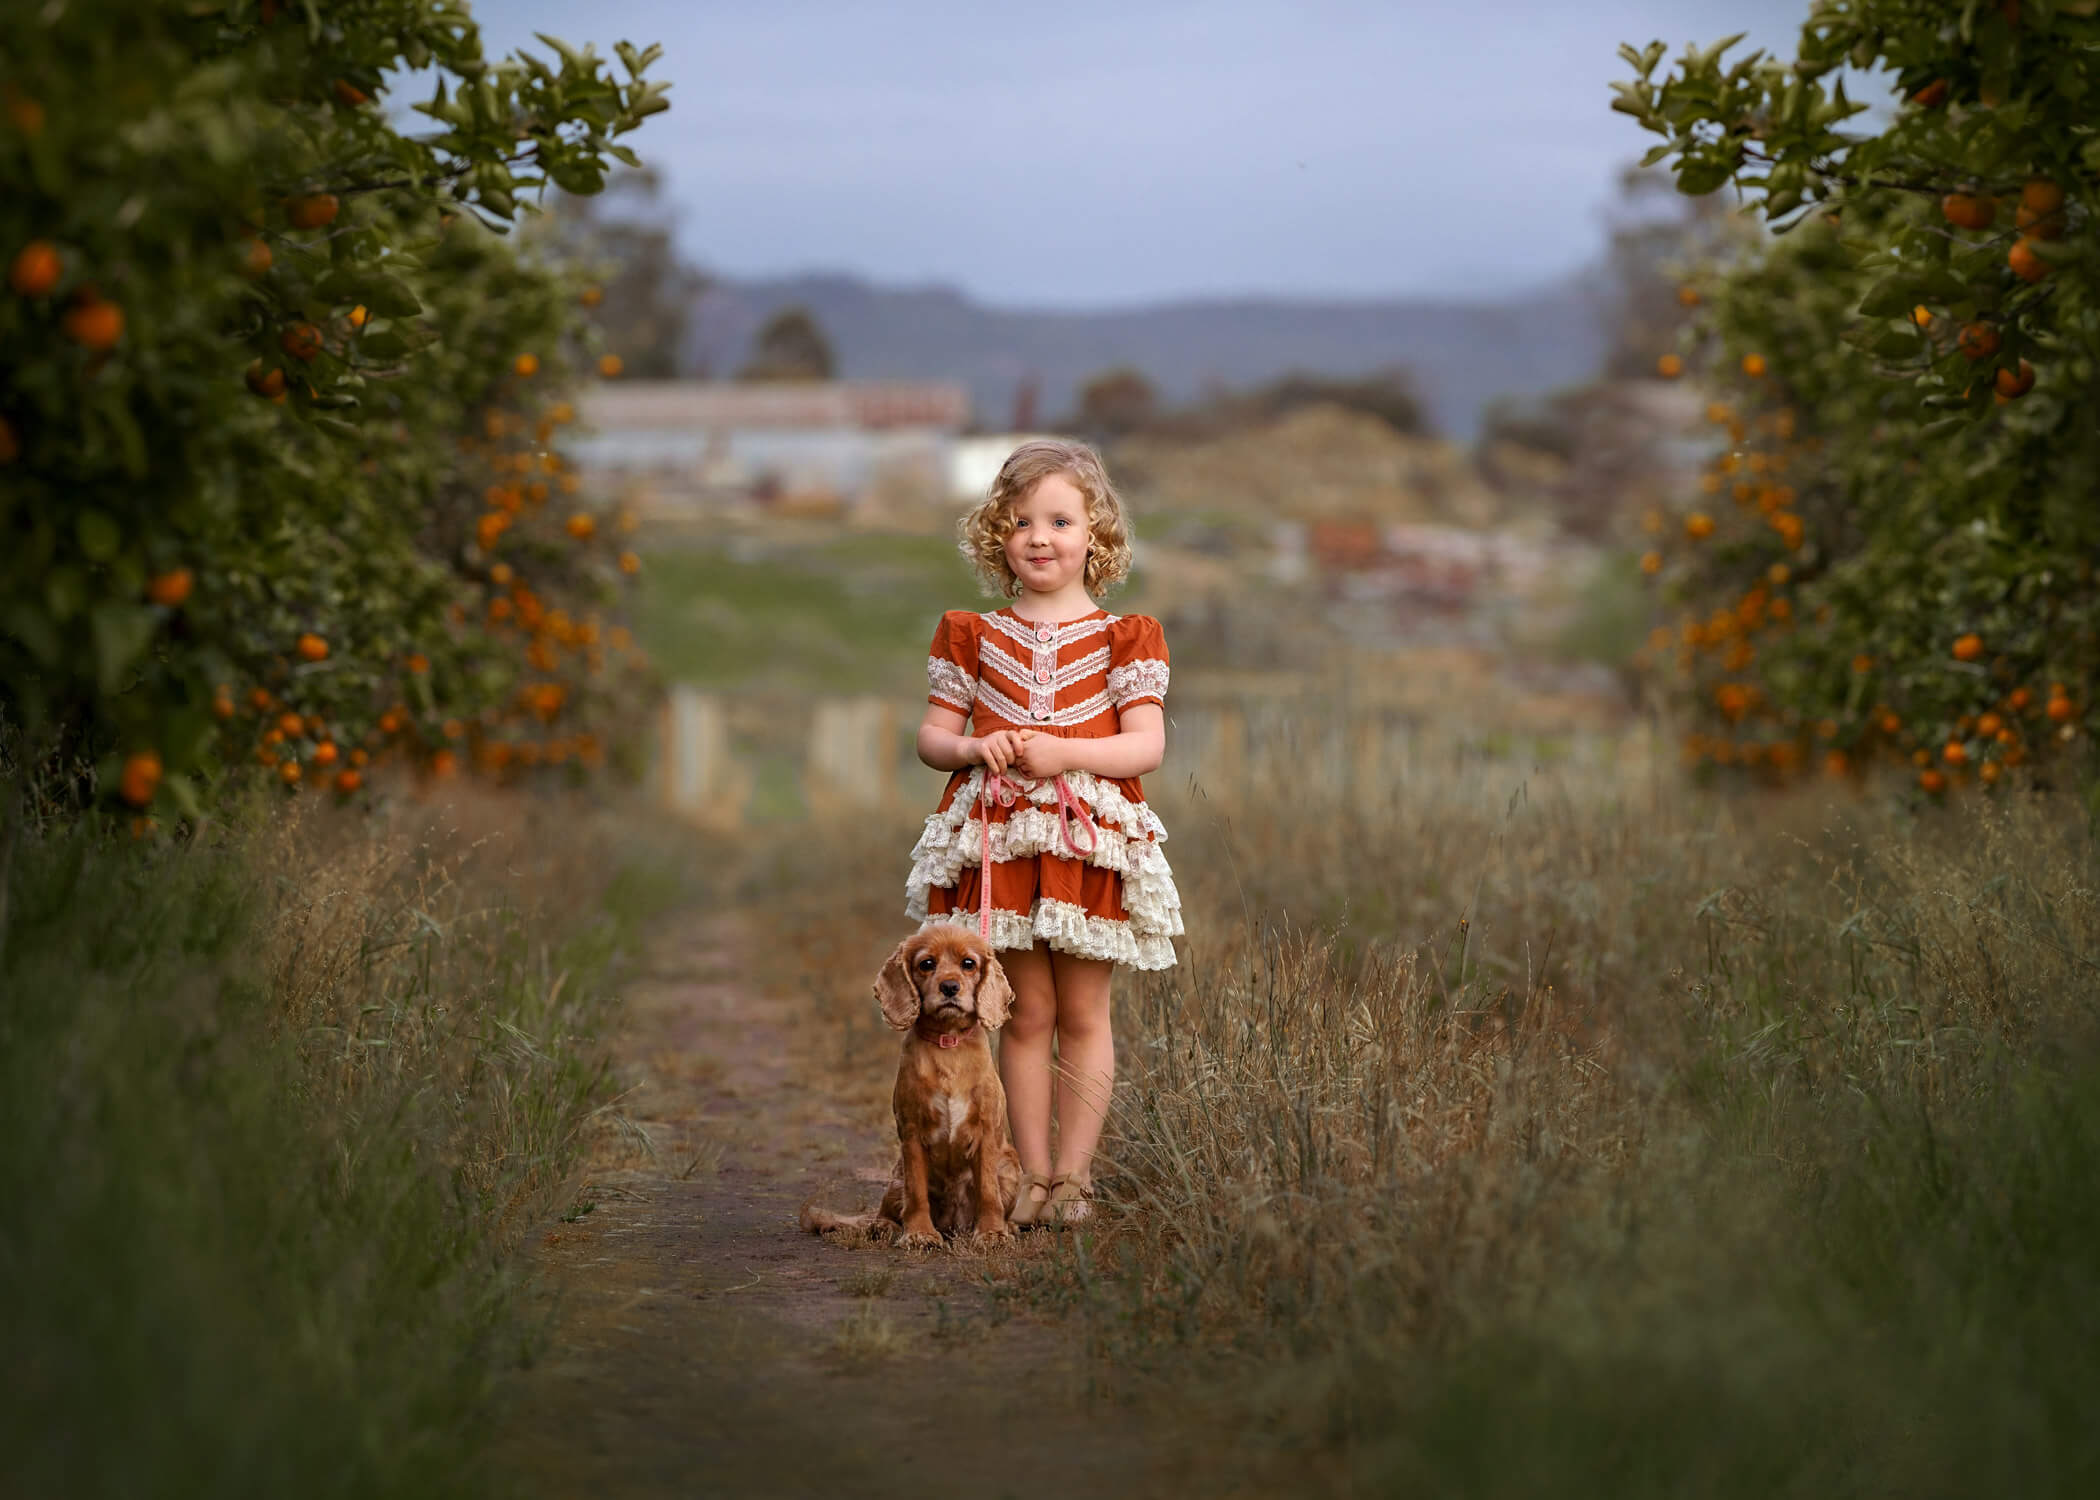 Little Perth girl with her dog photoshoot at an orange orchard